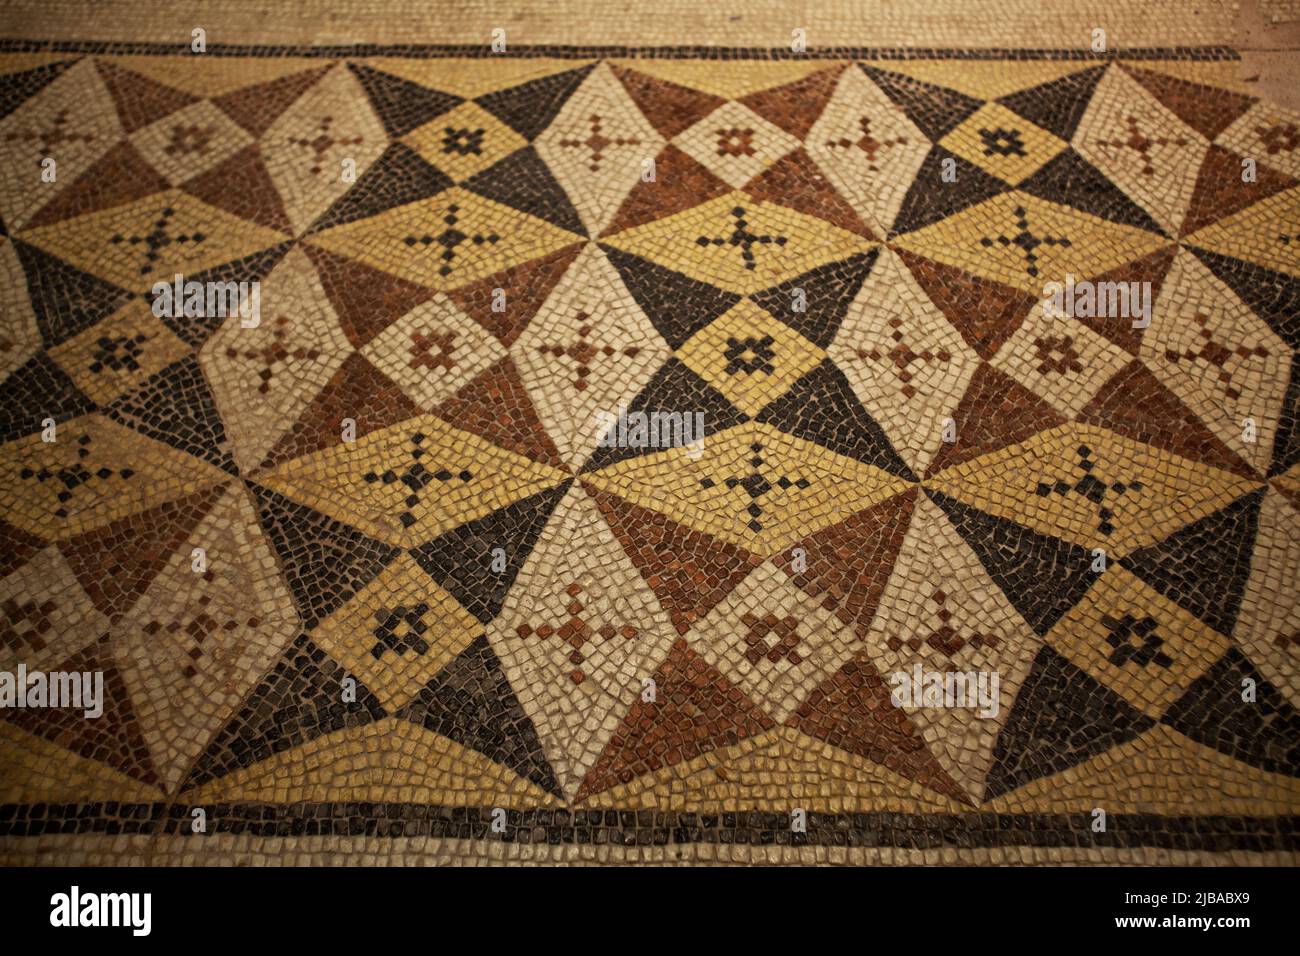 GAZIANTEP - TURKEY / September.17-.2011: Zeugma Museum is the world's number one mosaic museum Stock Photo